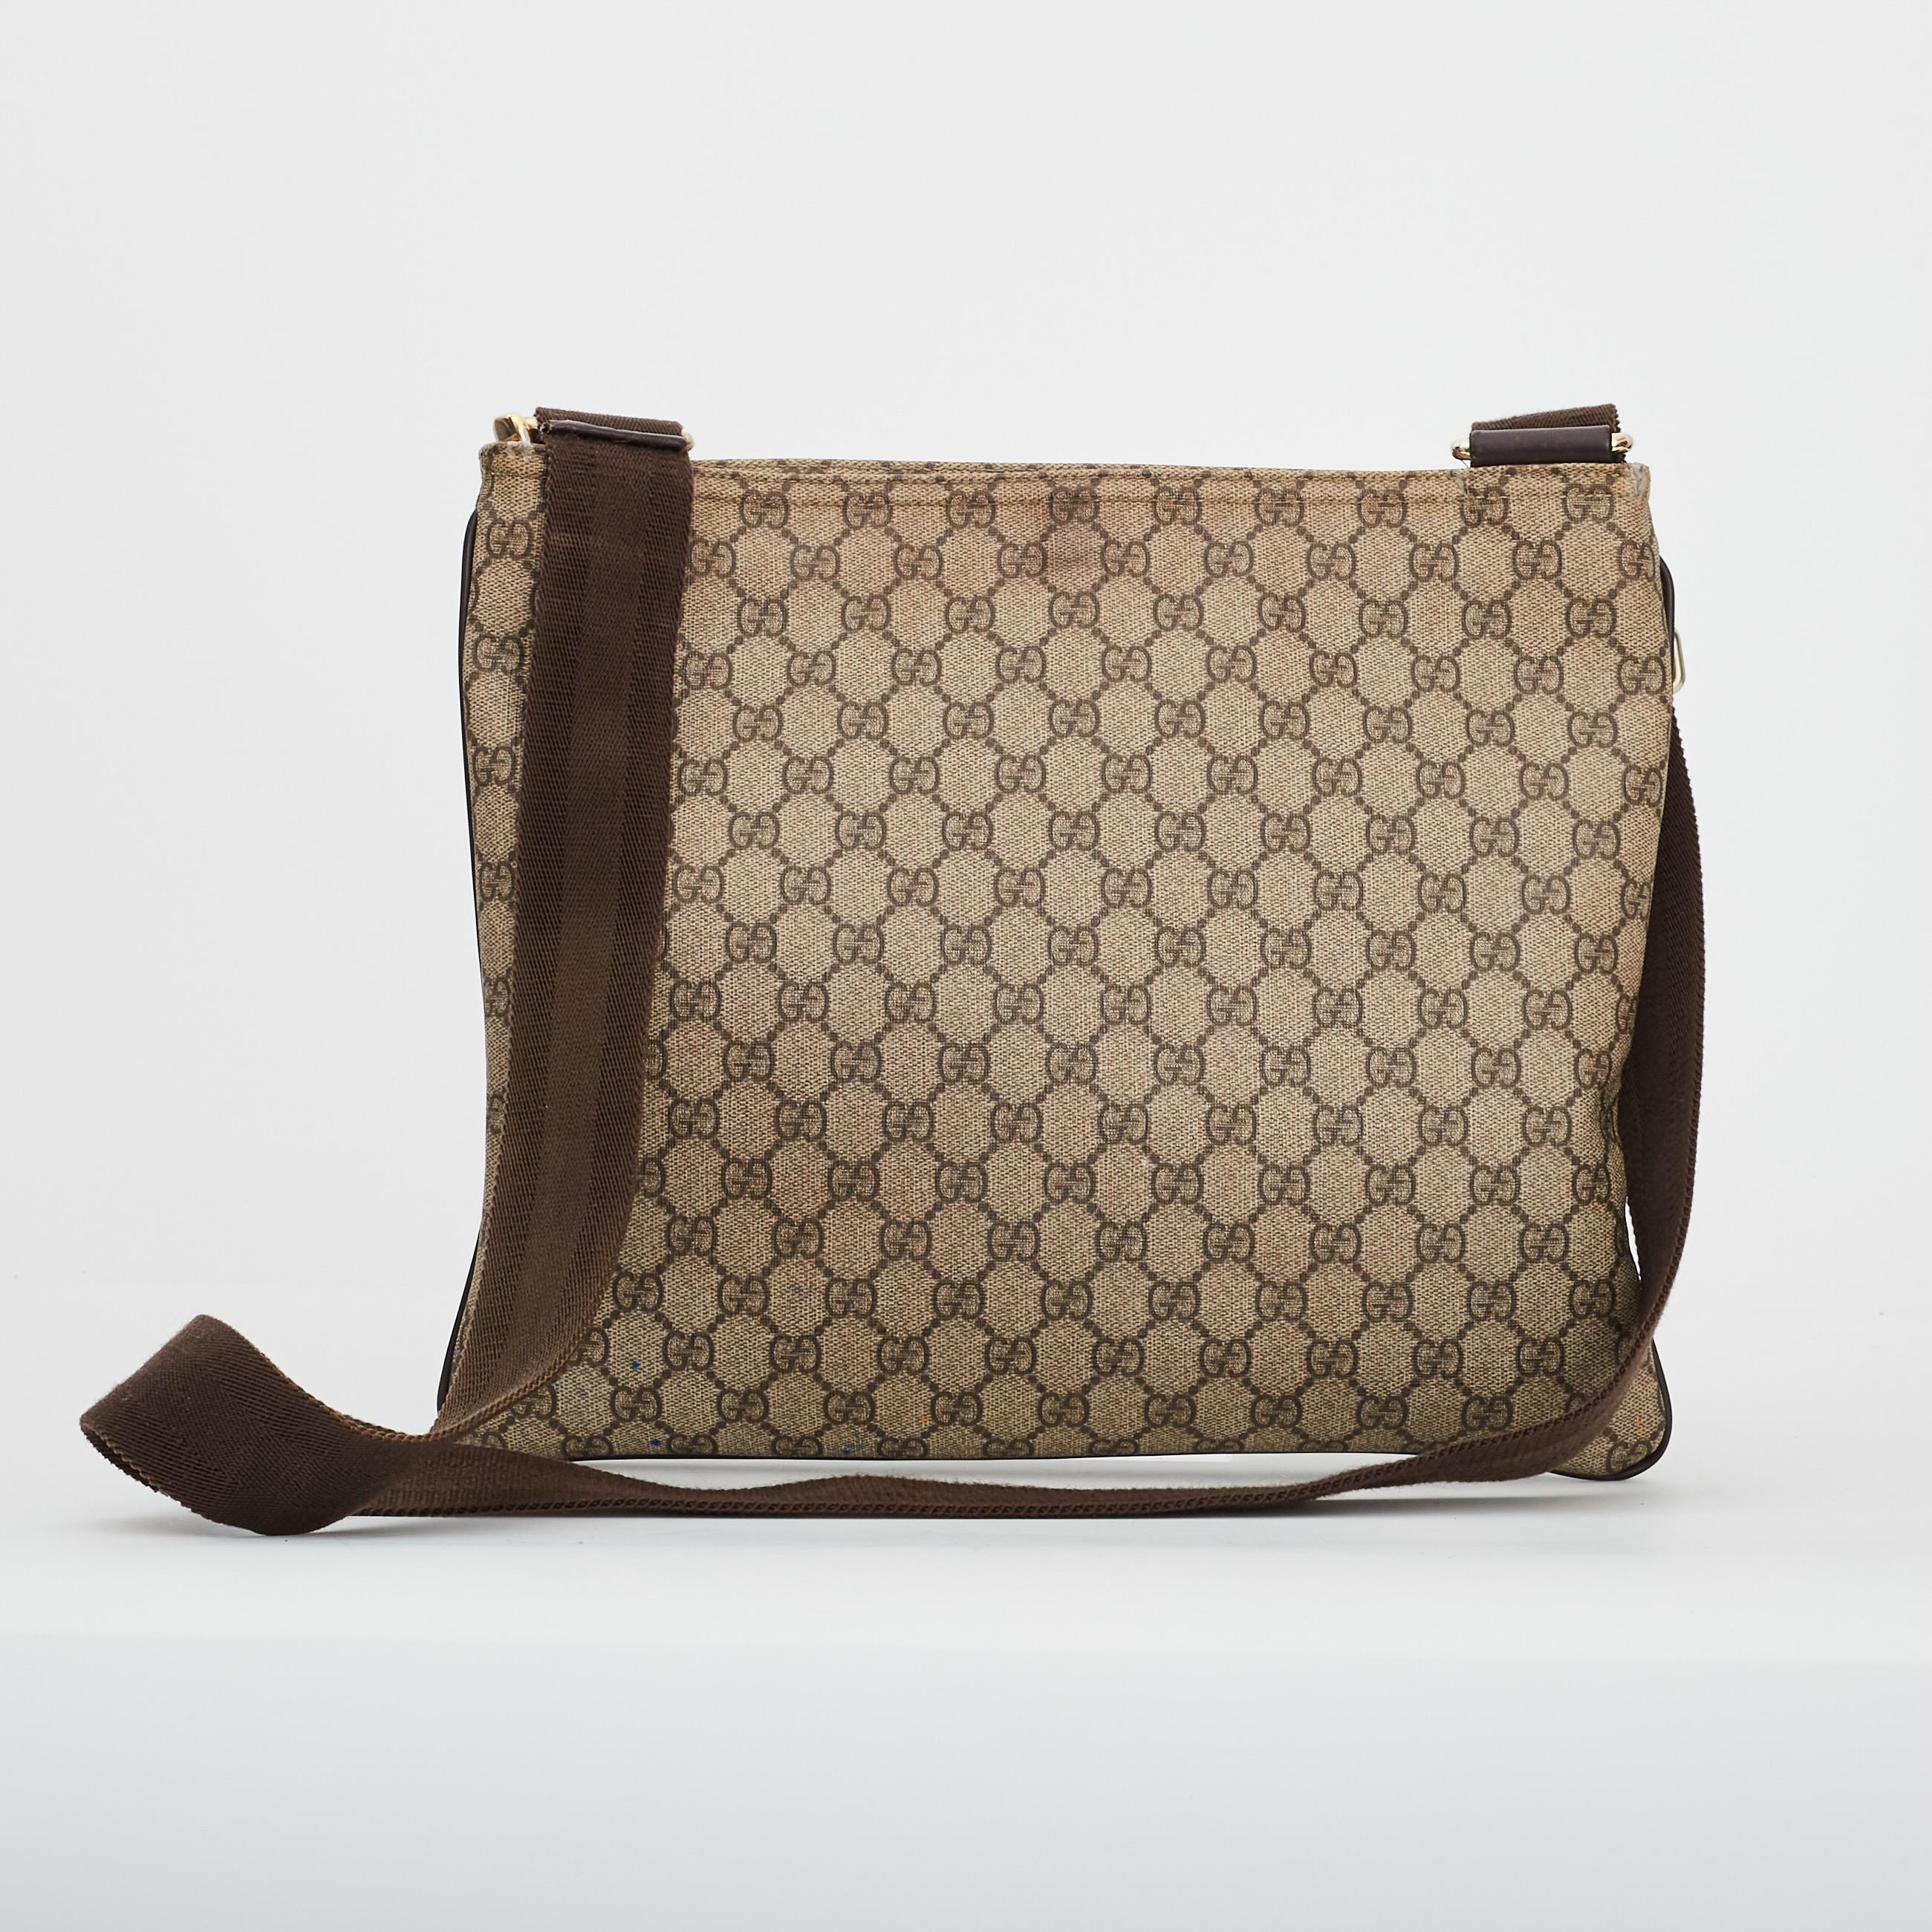 This Gucci beige/ebony monogram crossbody bag is made with GG supreme coated canvas with leather finishes and a woven fabric shoulder strap. The bag features zip closure and a light cream coloured woven fabric interior with a slip pocket for your